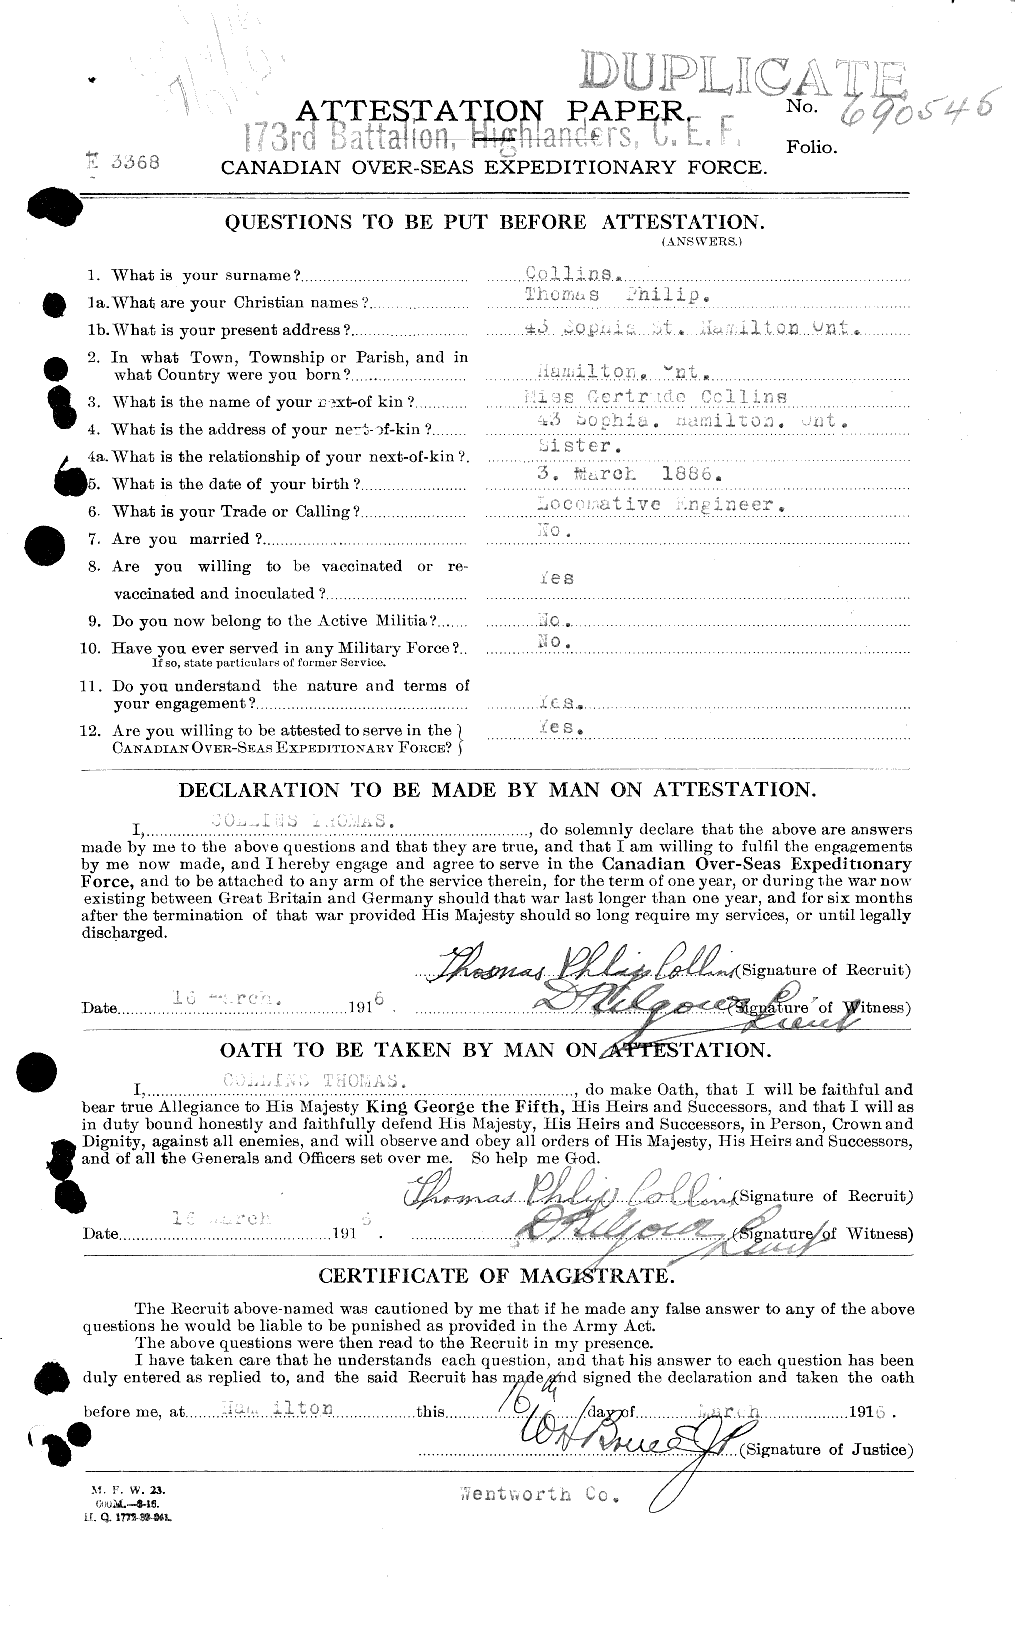 Personnel Records of the First World War - CEF 040671a